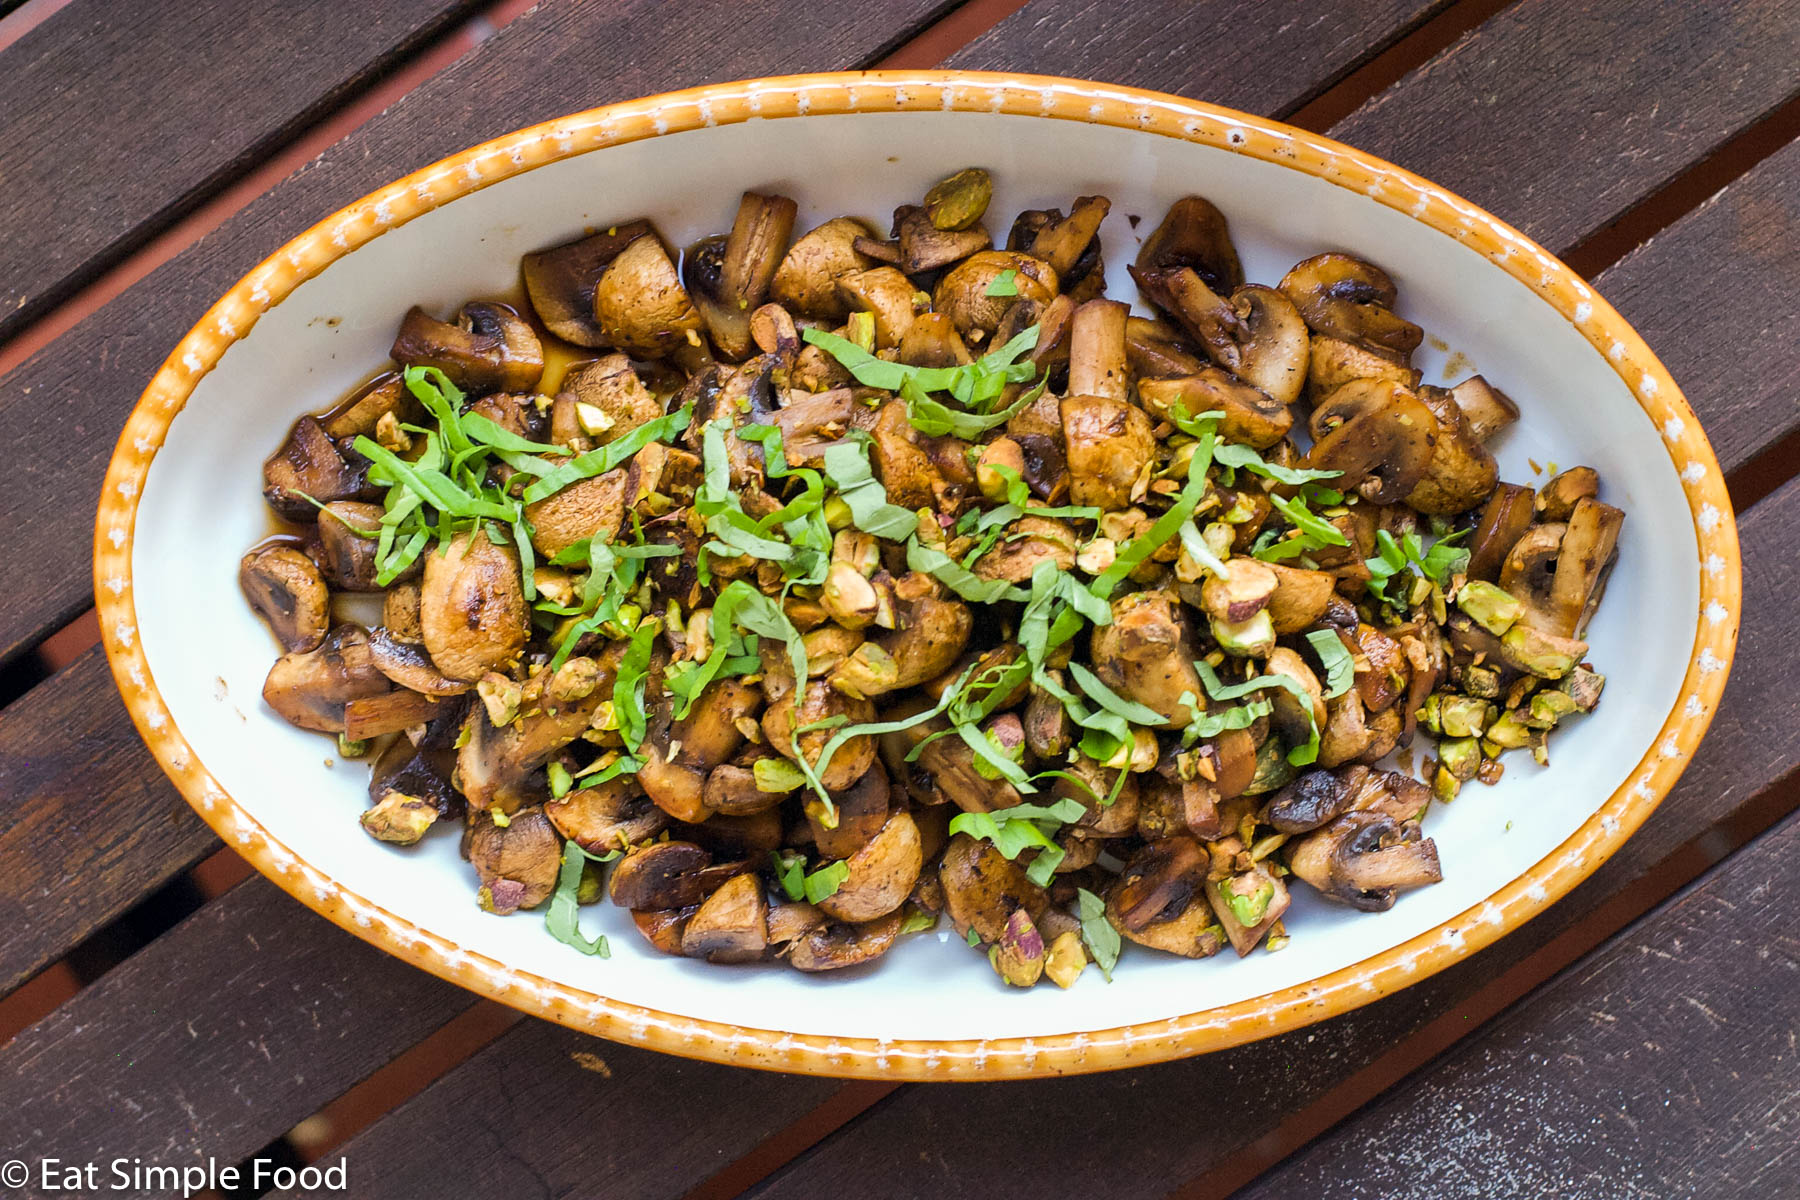 Cooked browned quartered mushrooms garnished with sliced basils and pistachios in a yellow baking dish. Top View.